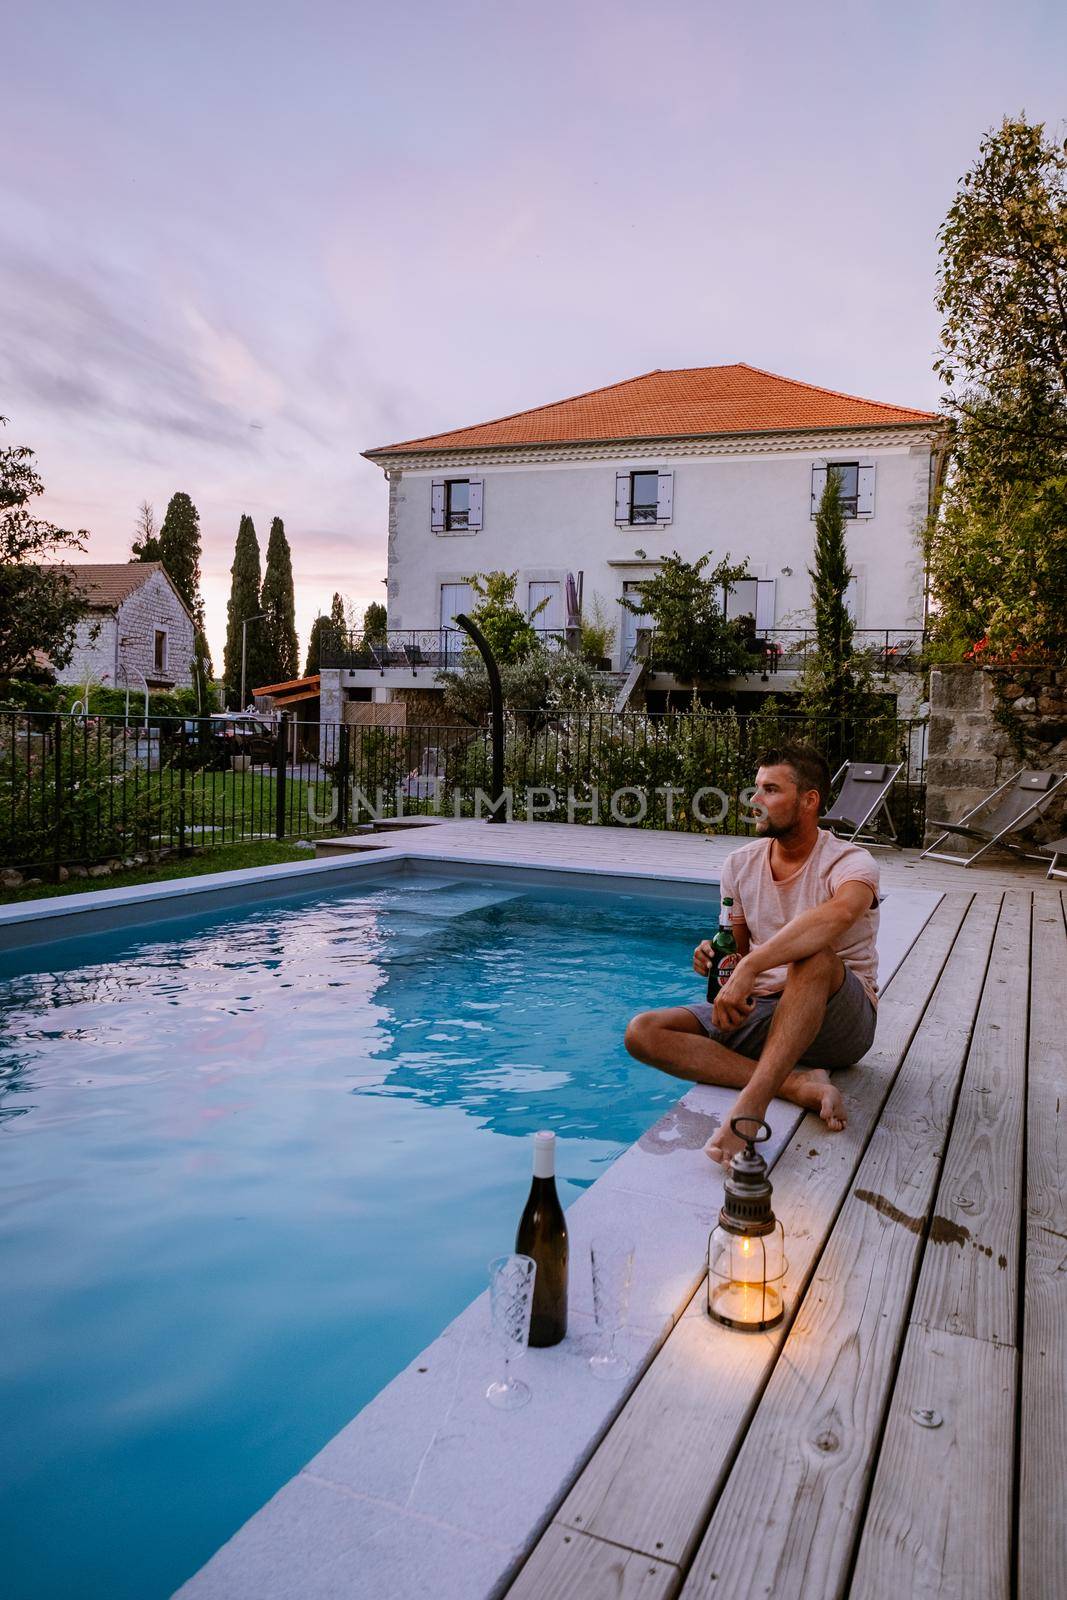 French vacation home with wooden deck and swimming pool in the Ardeche France Europe. guy relaxing by the pool with wooden deck during luxury vacation at an holiday home in South of France